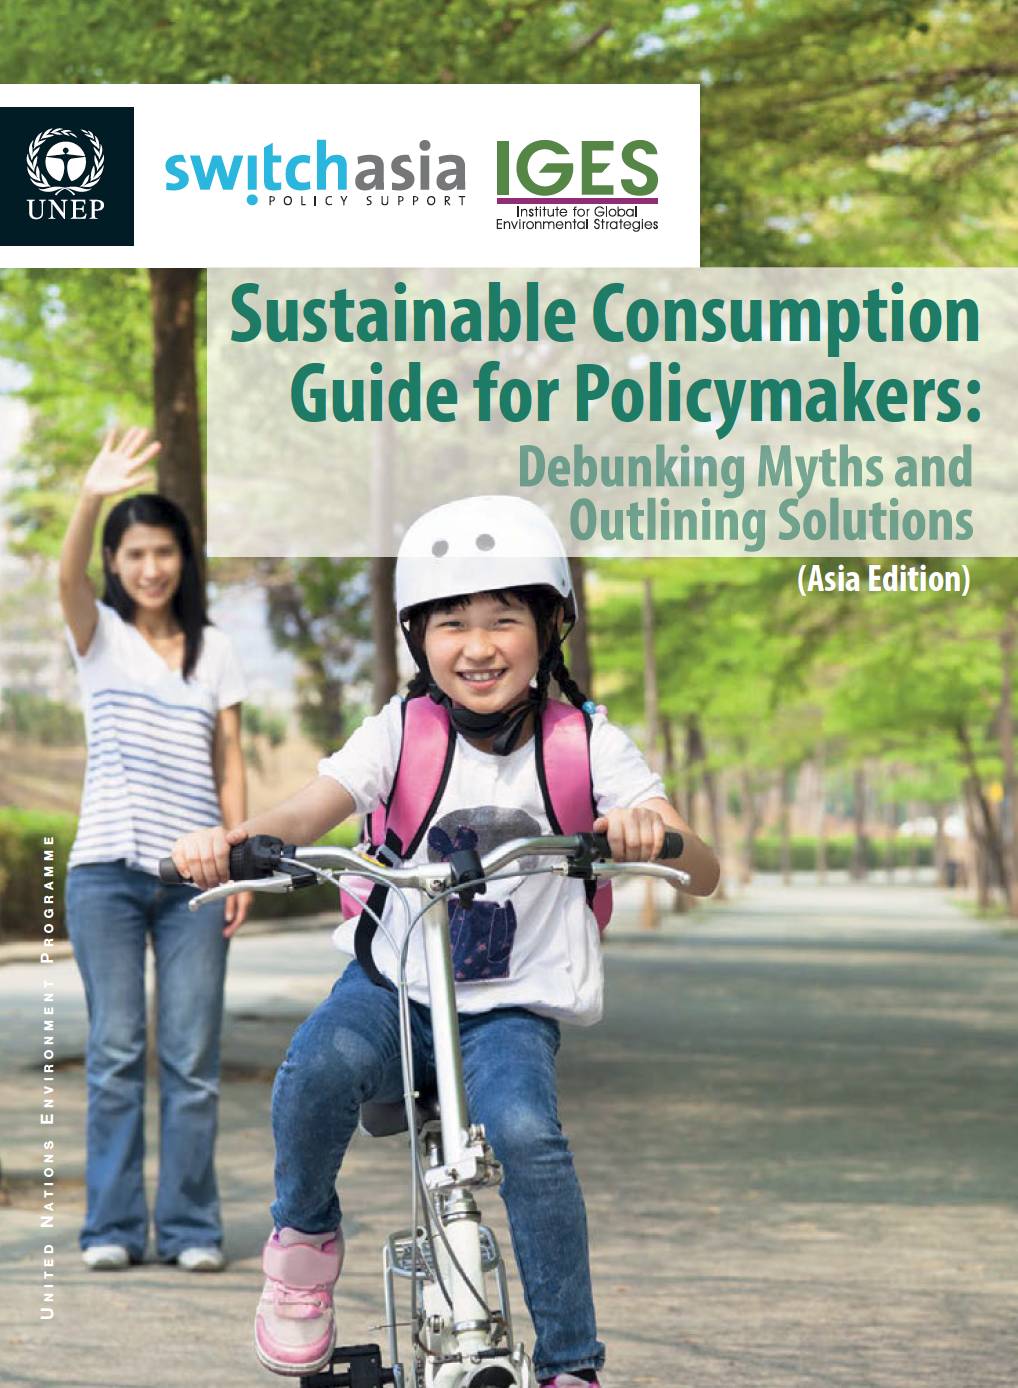 Sustainable Consumption Guide for Policymakers